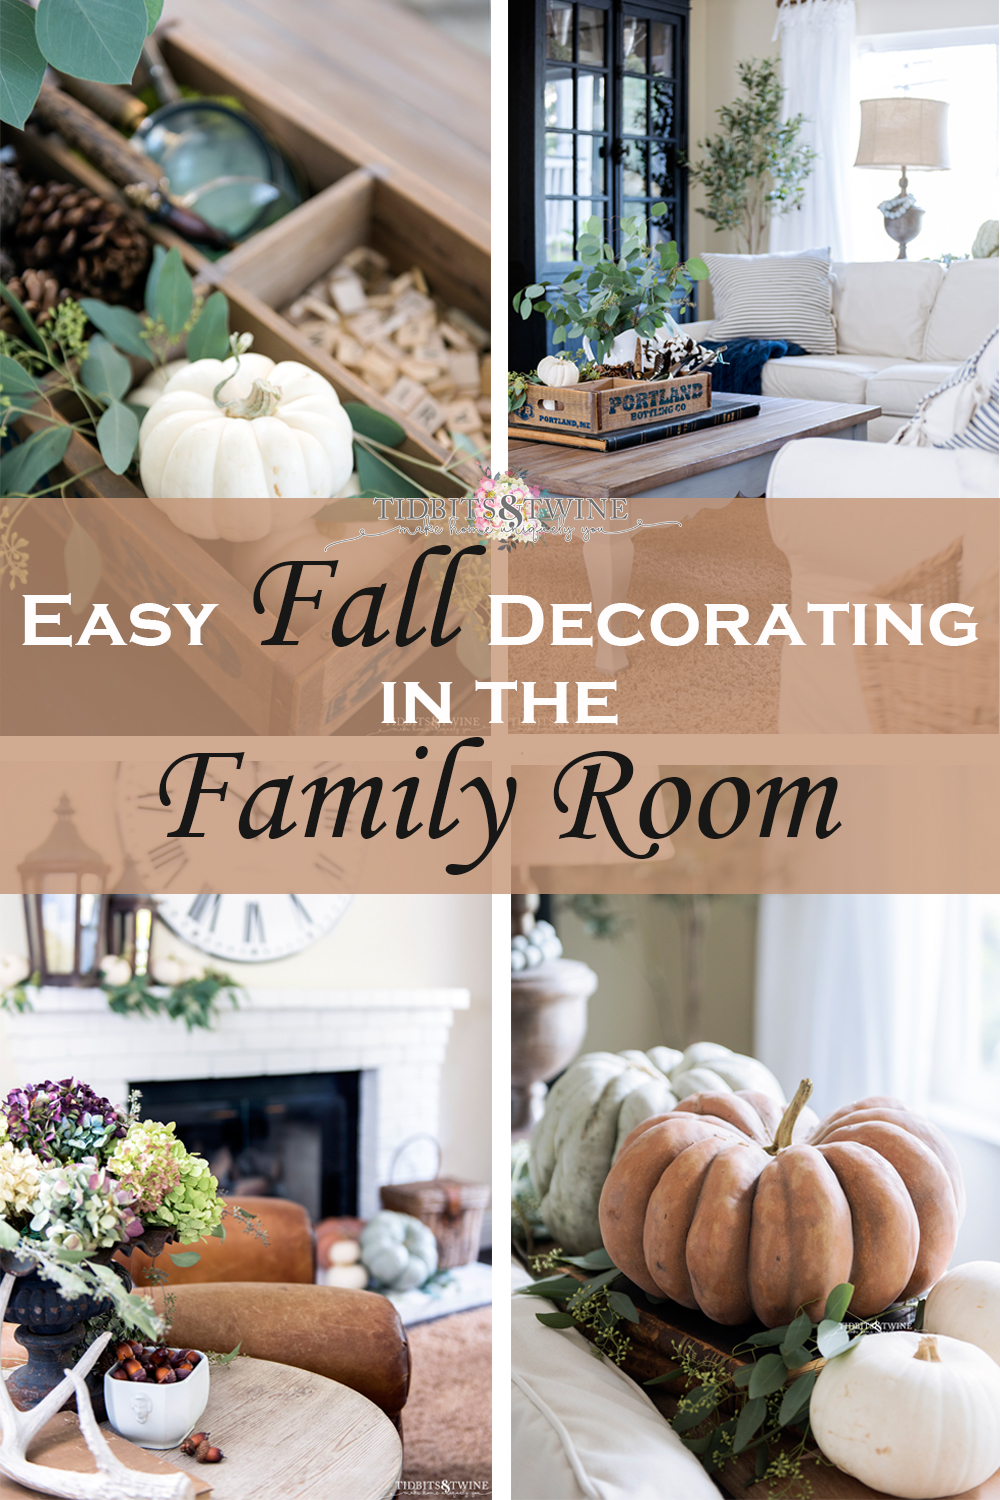 Easy Fall Decorating In the Family Room